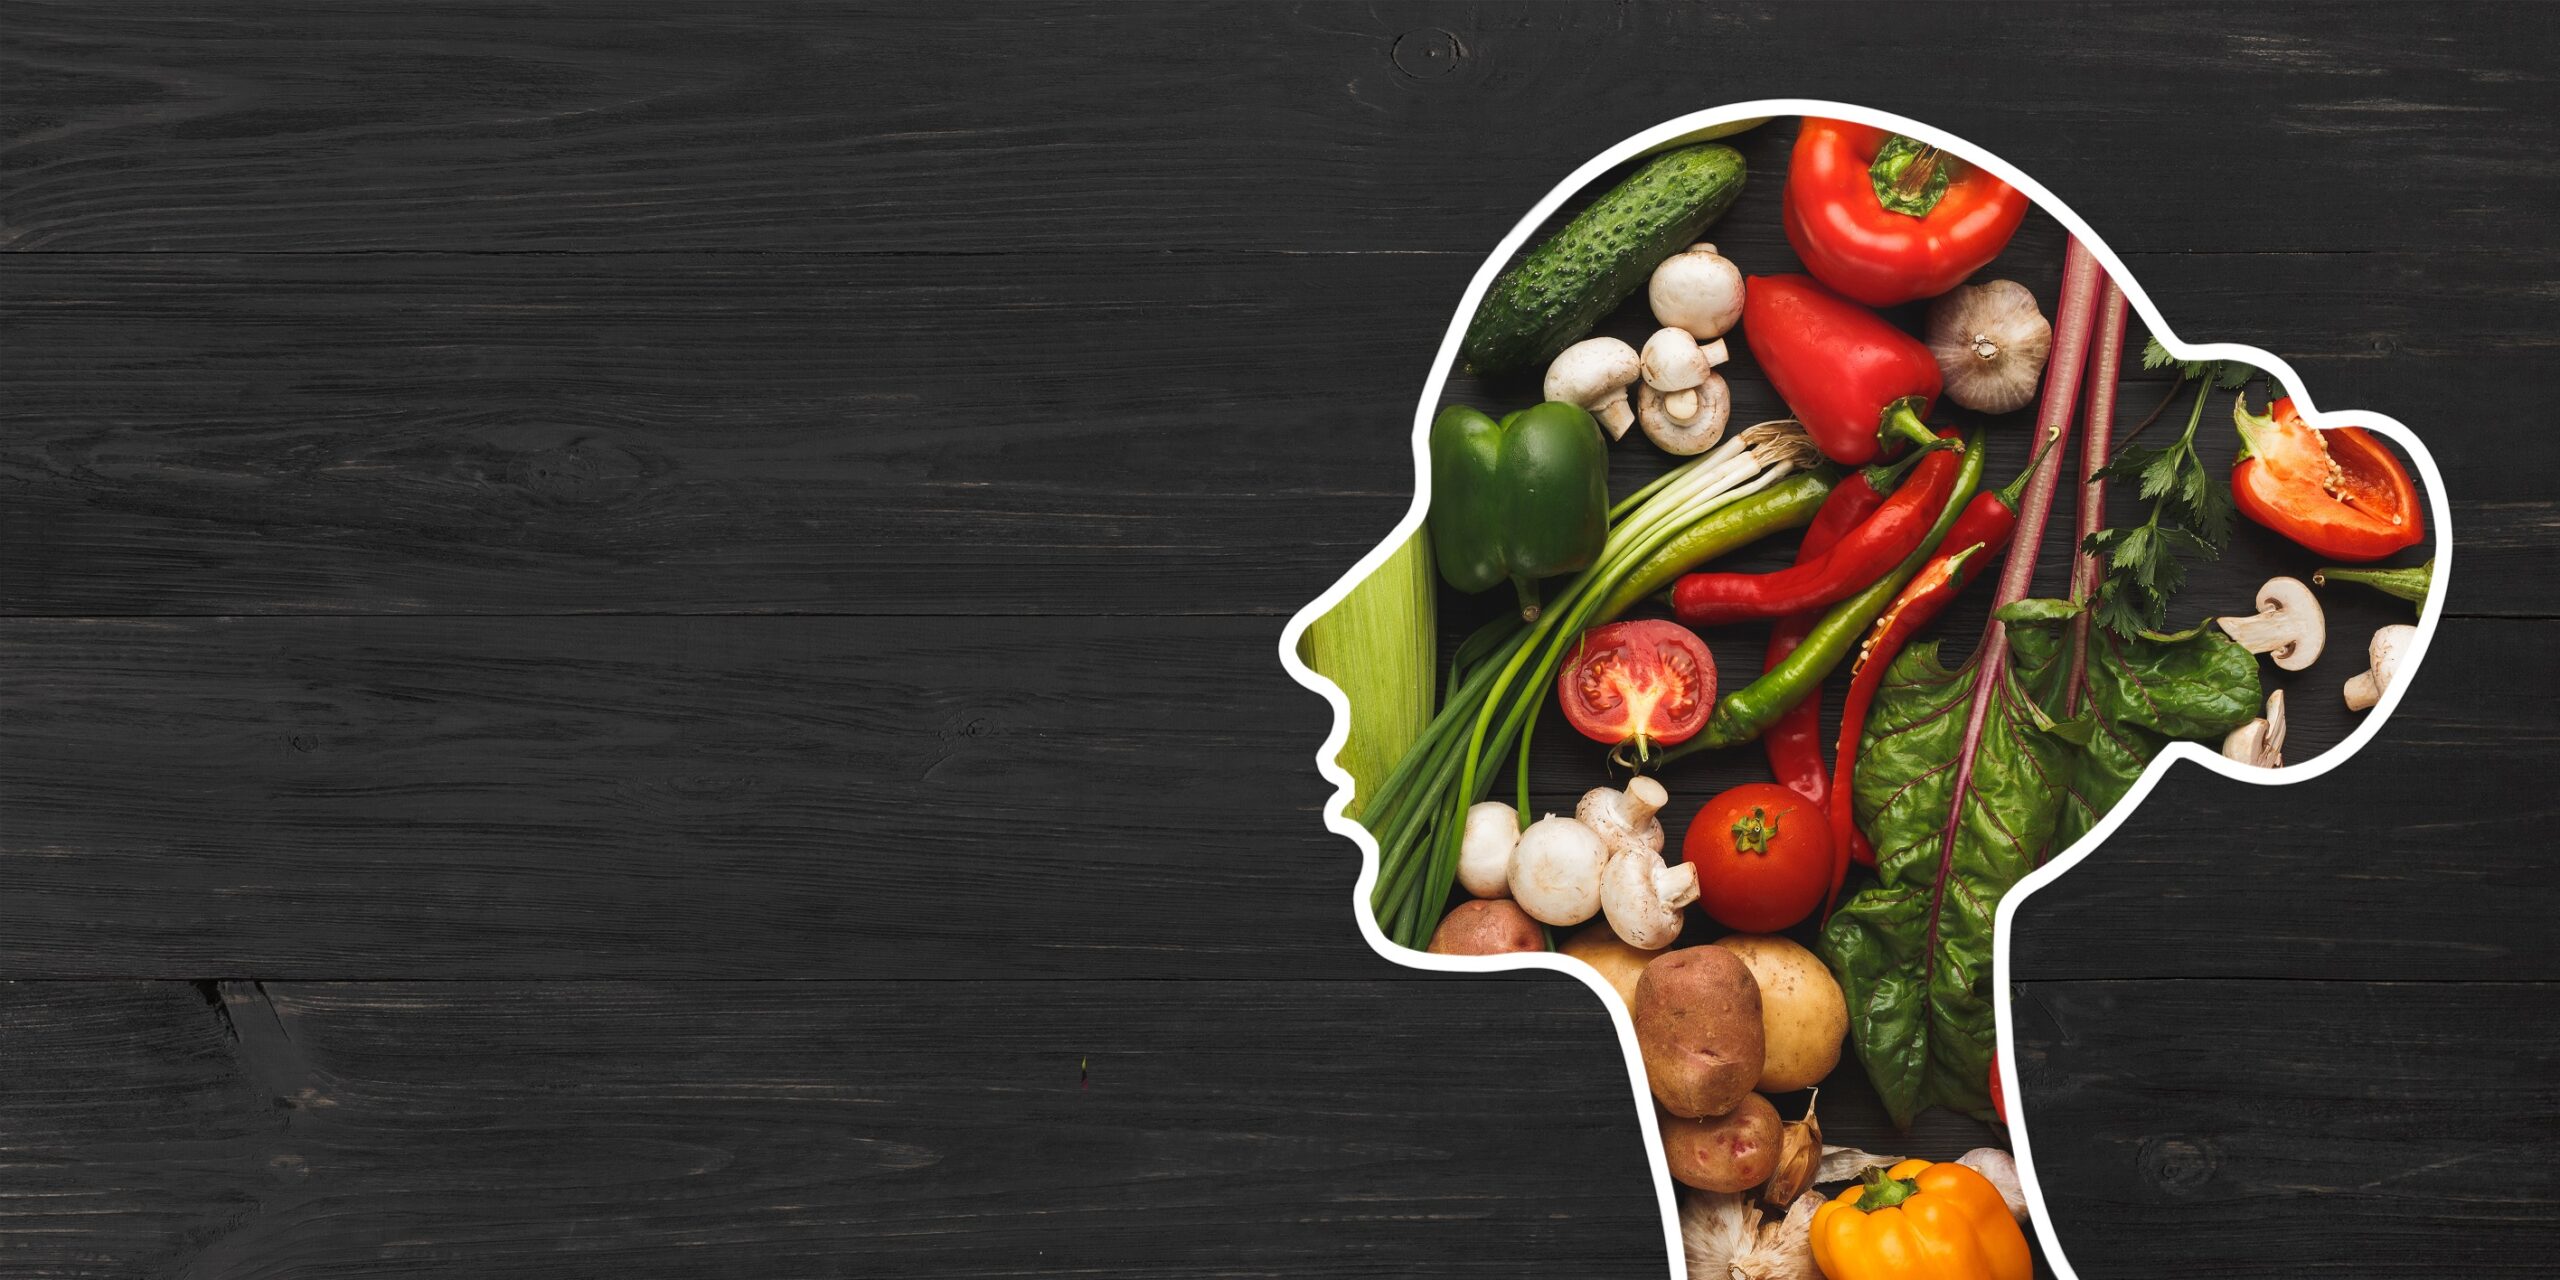 The Mind Diet Boosts Cognitive Performance - A Healing Exercise